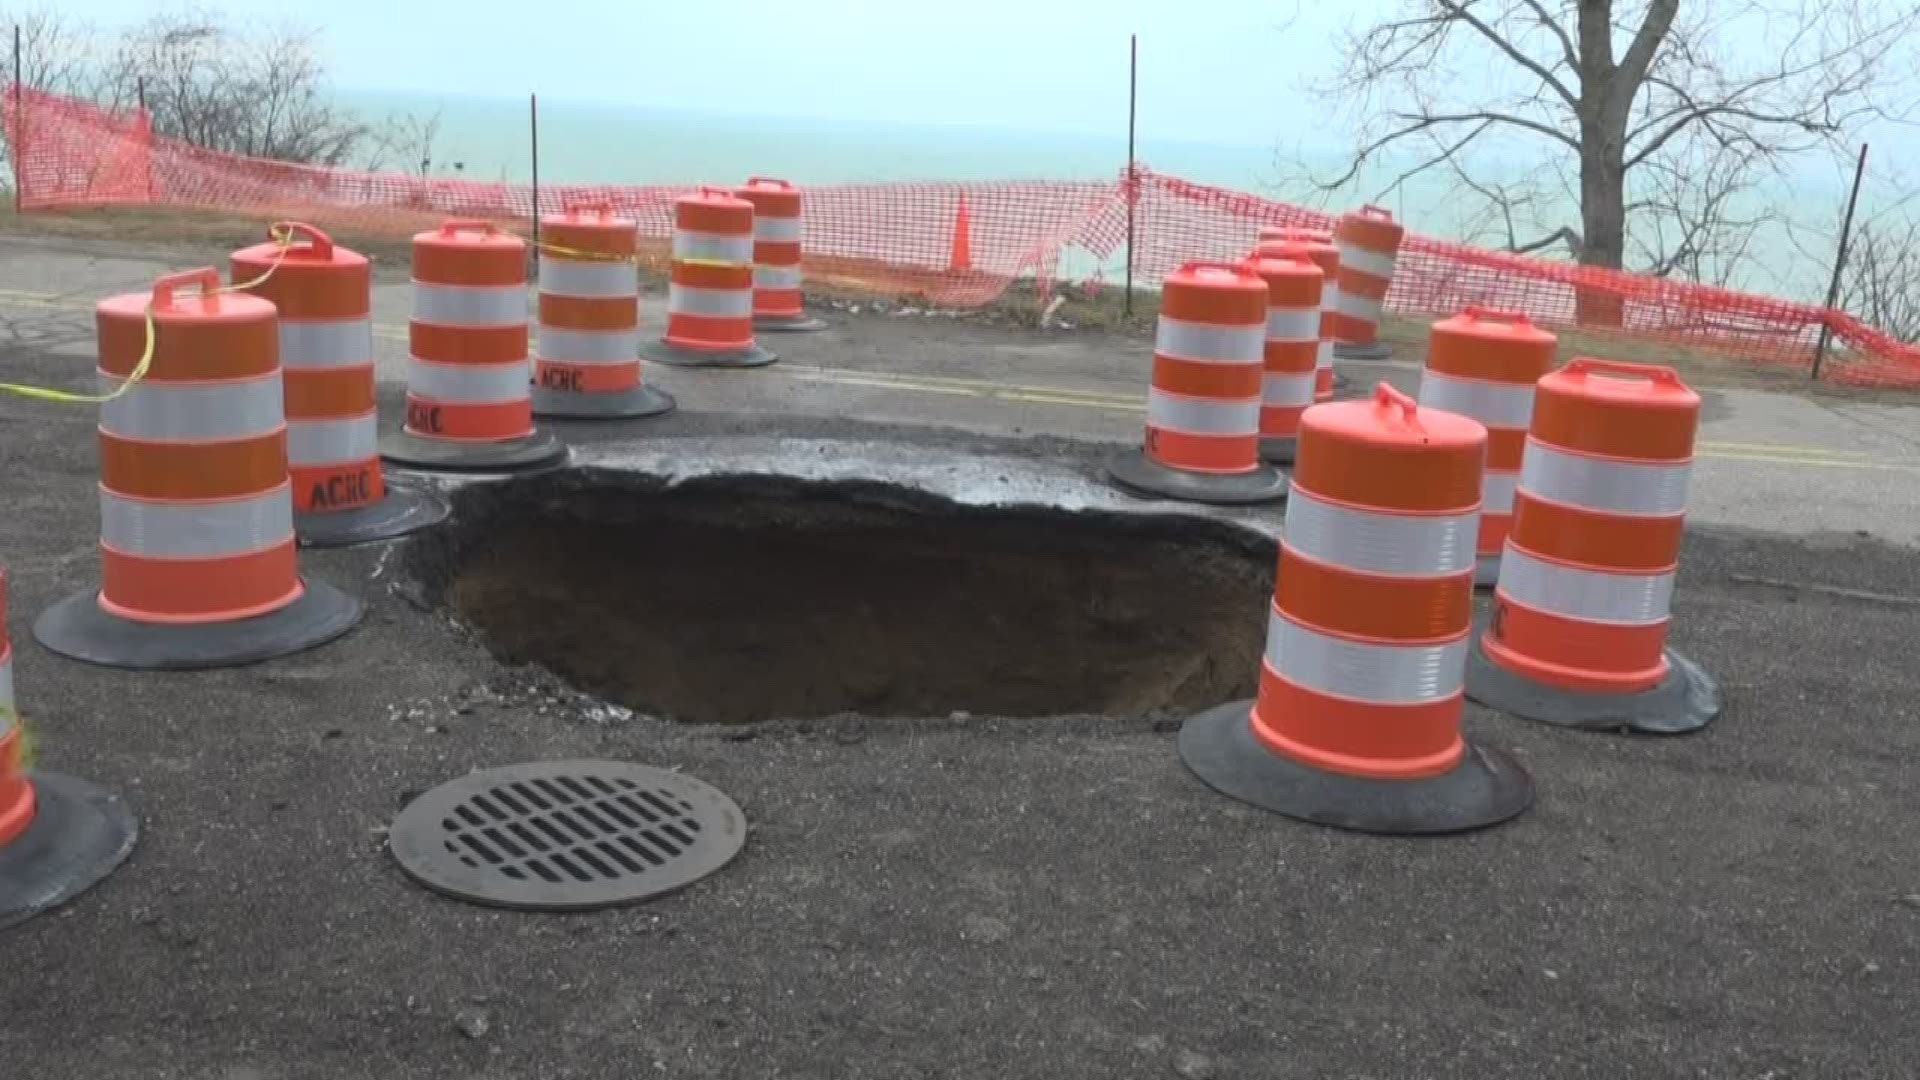 Part of Lakeshore Drive in Saugatuck Township is closed indefinitely due to a large sinkhole.